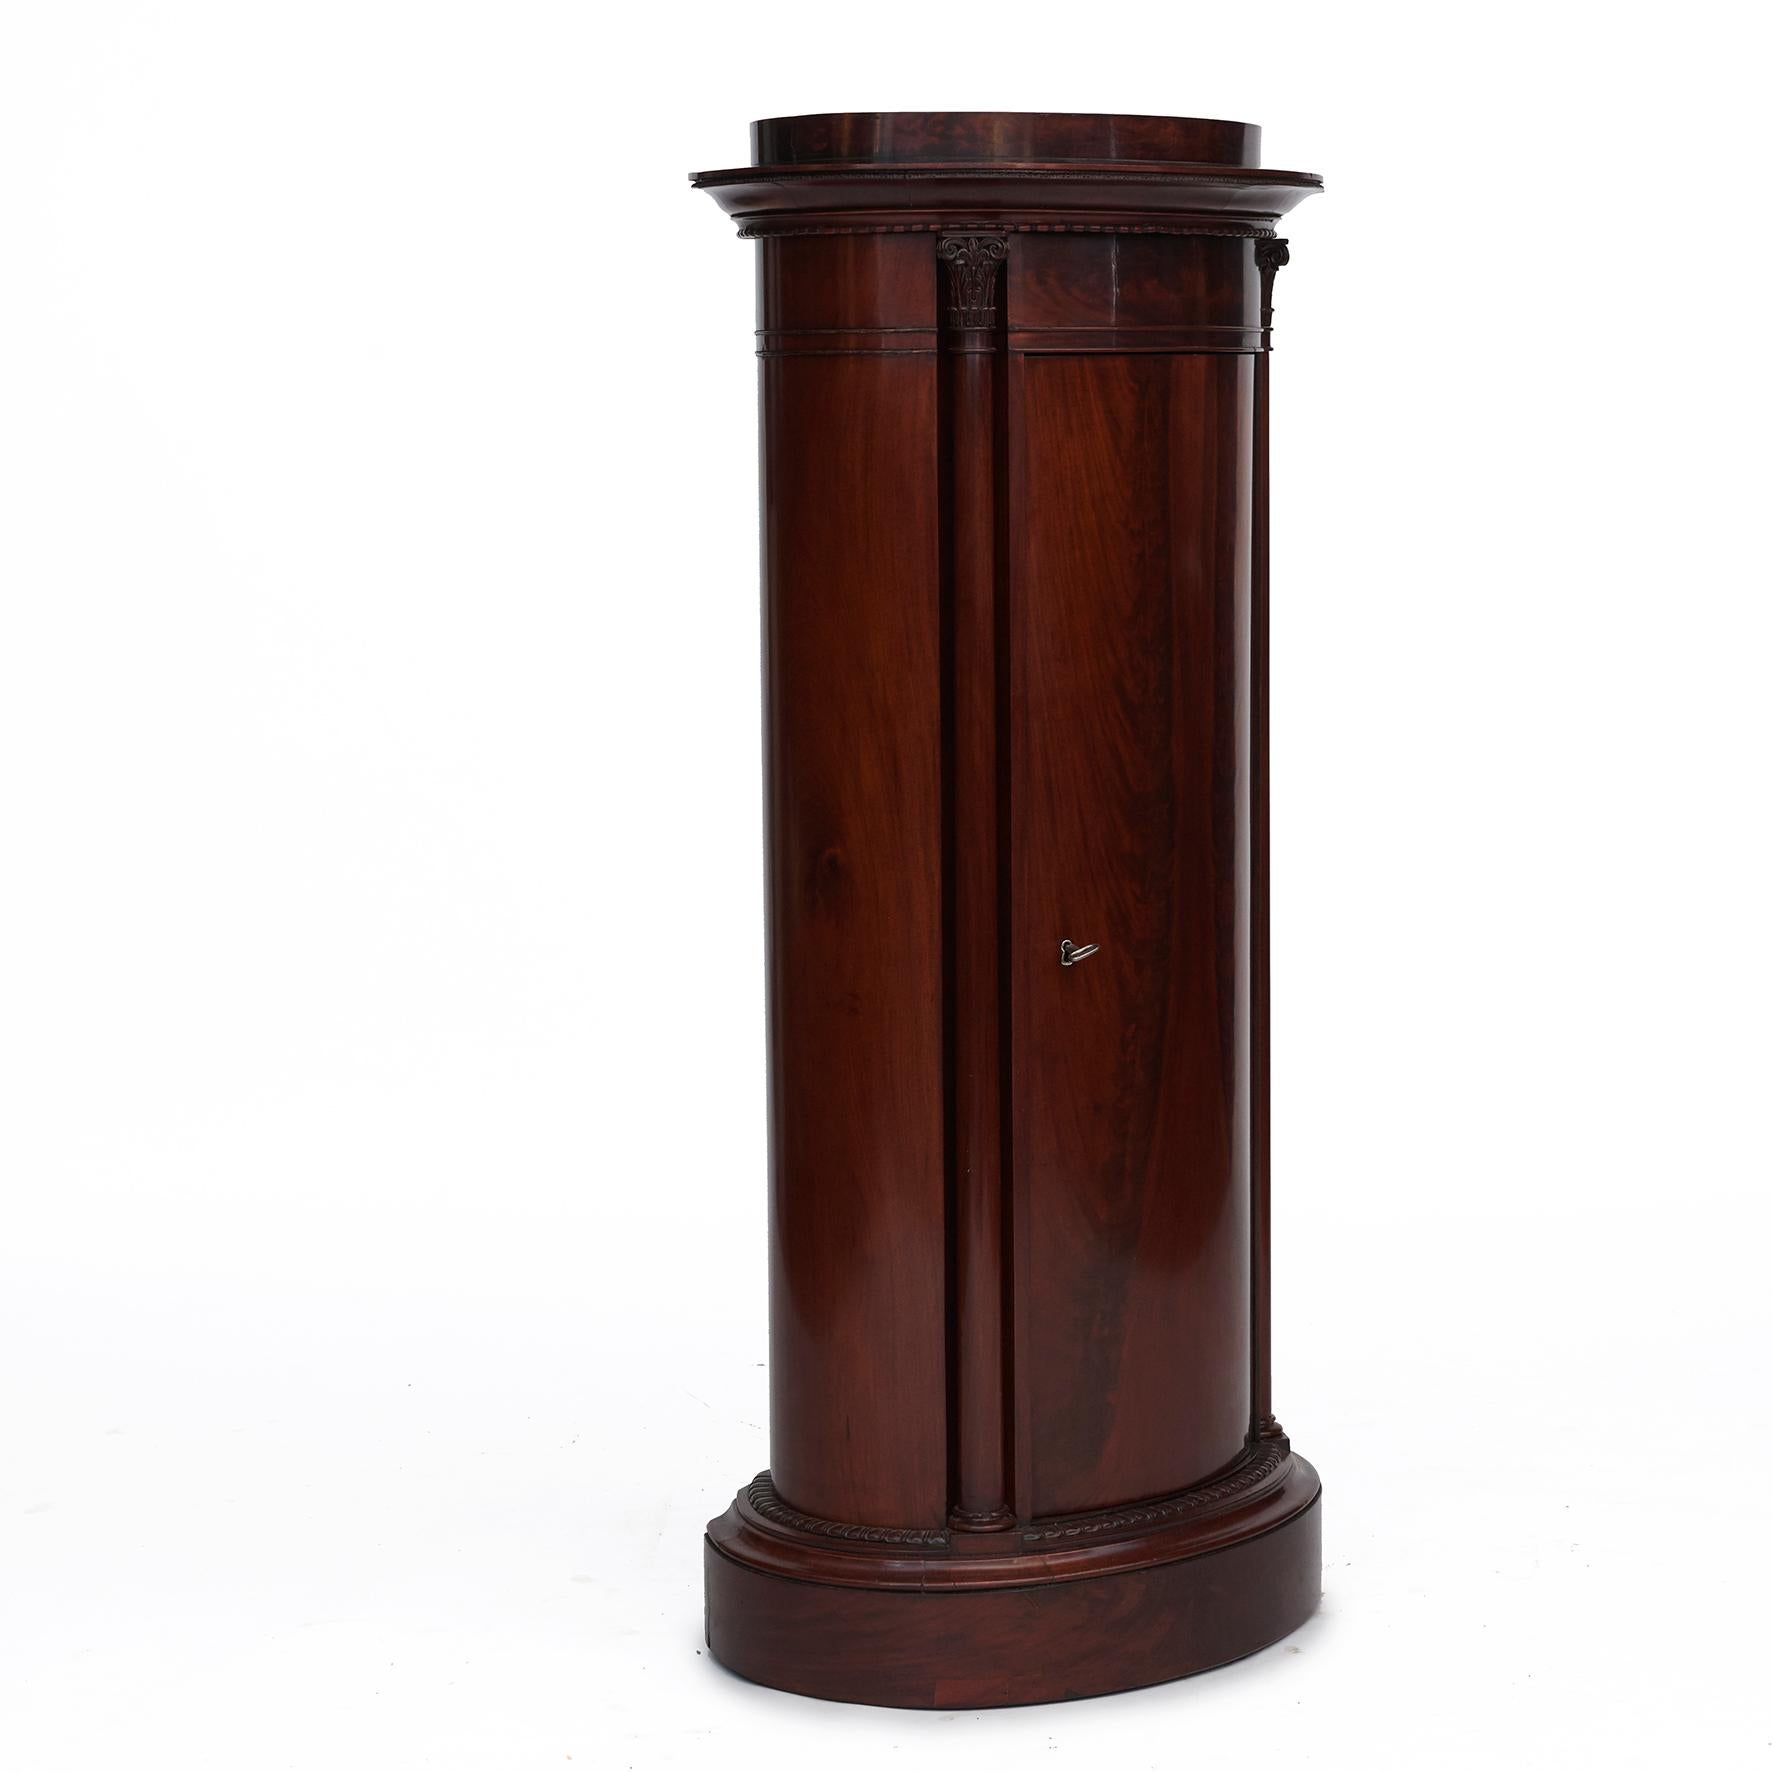 Oval pedestal cabinet, late empire.
Mirror-cut flamed mahogany with beautiful grain. Door flanked by columns with wood-carved capitals.
Behind the door 3 shelves.

Gently French repolished in perfect condition.
Includes original